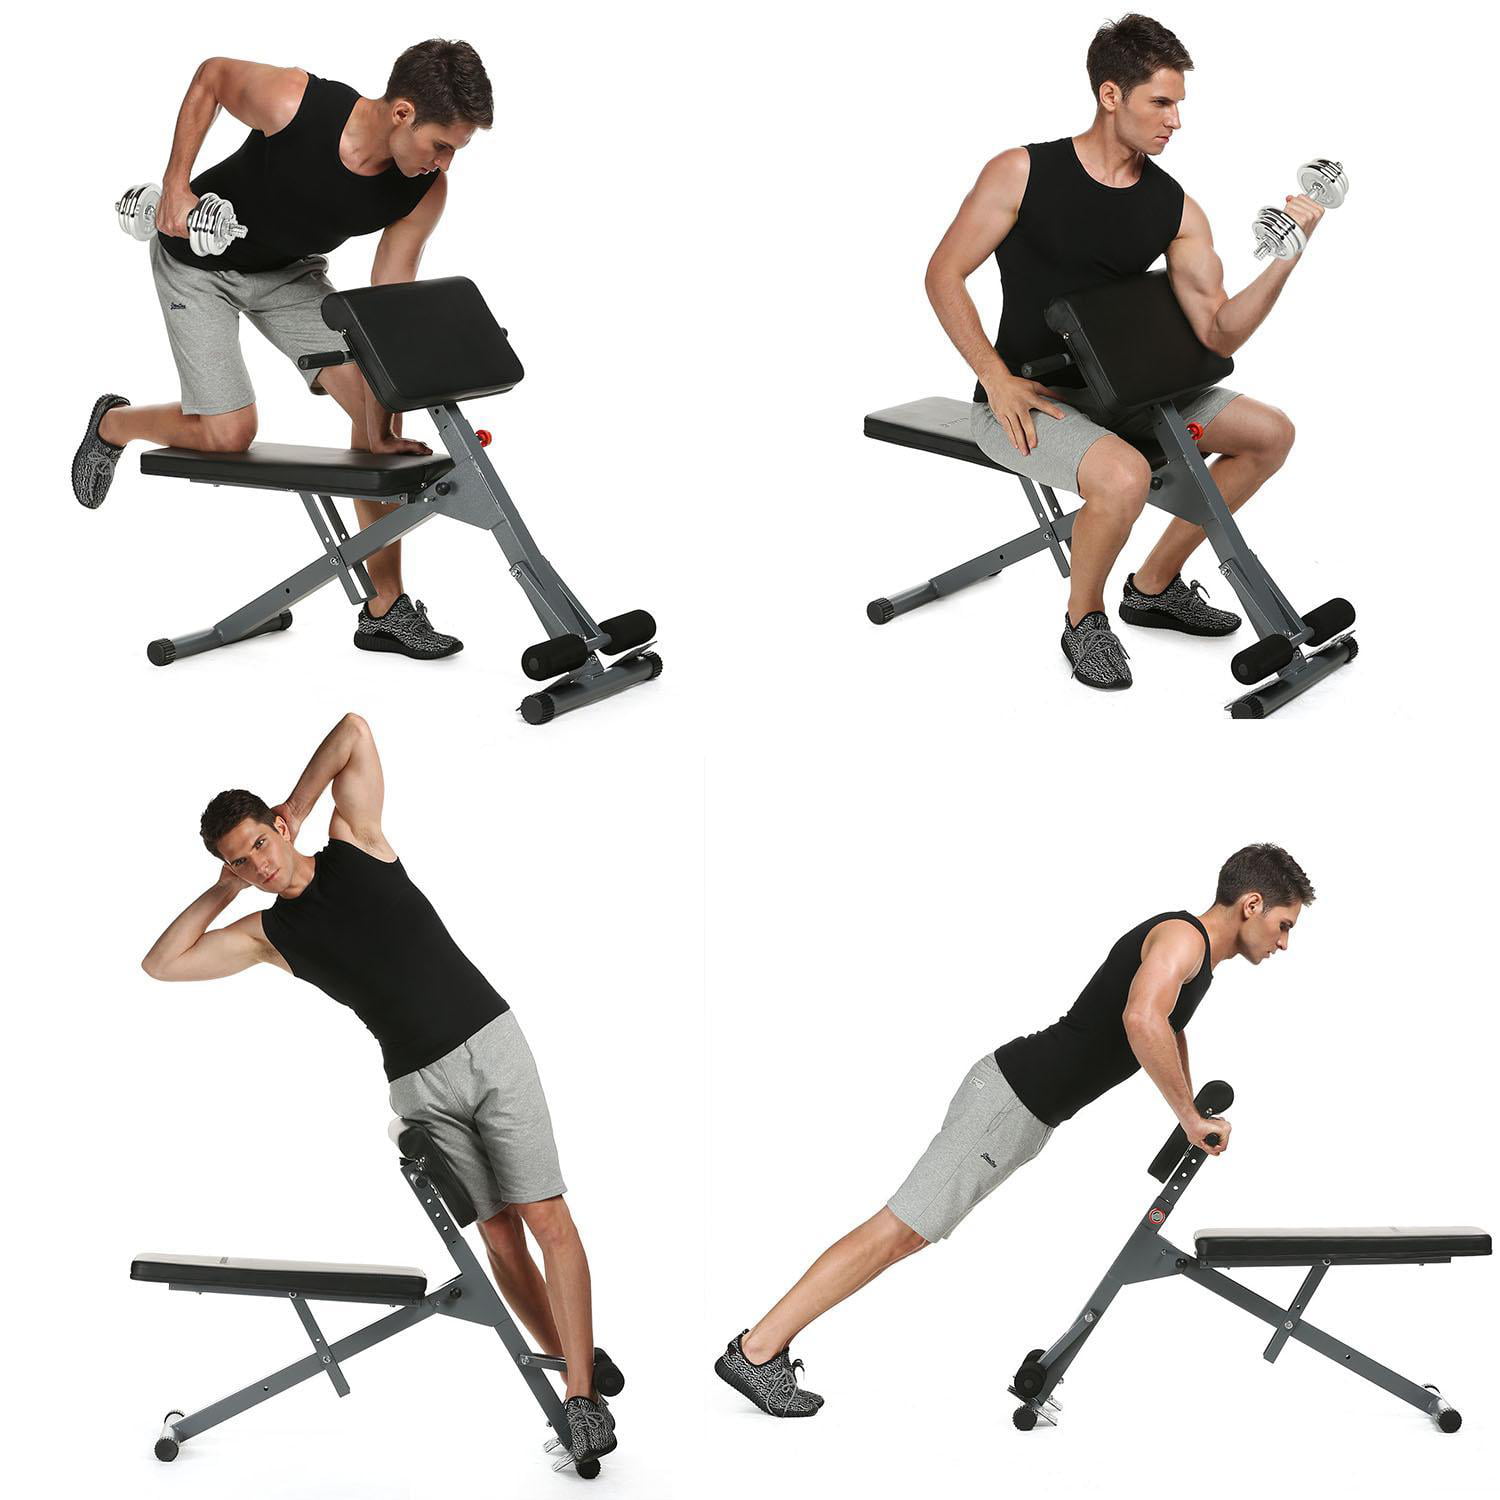 Details about   Weight Bench Multi Adjustable Gym Workout Exercise Flat Incline Decline Sit Up 